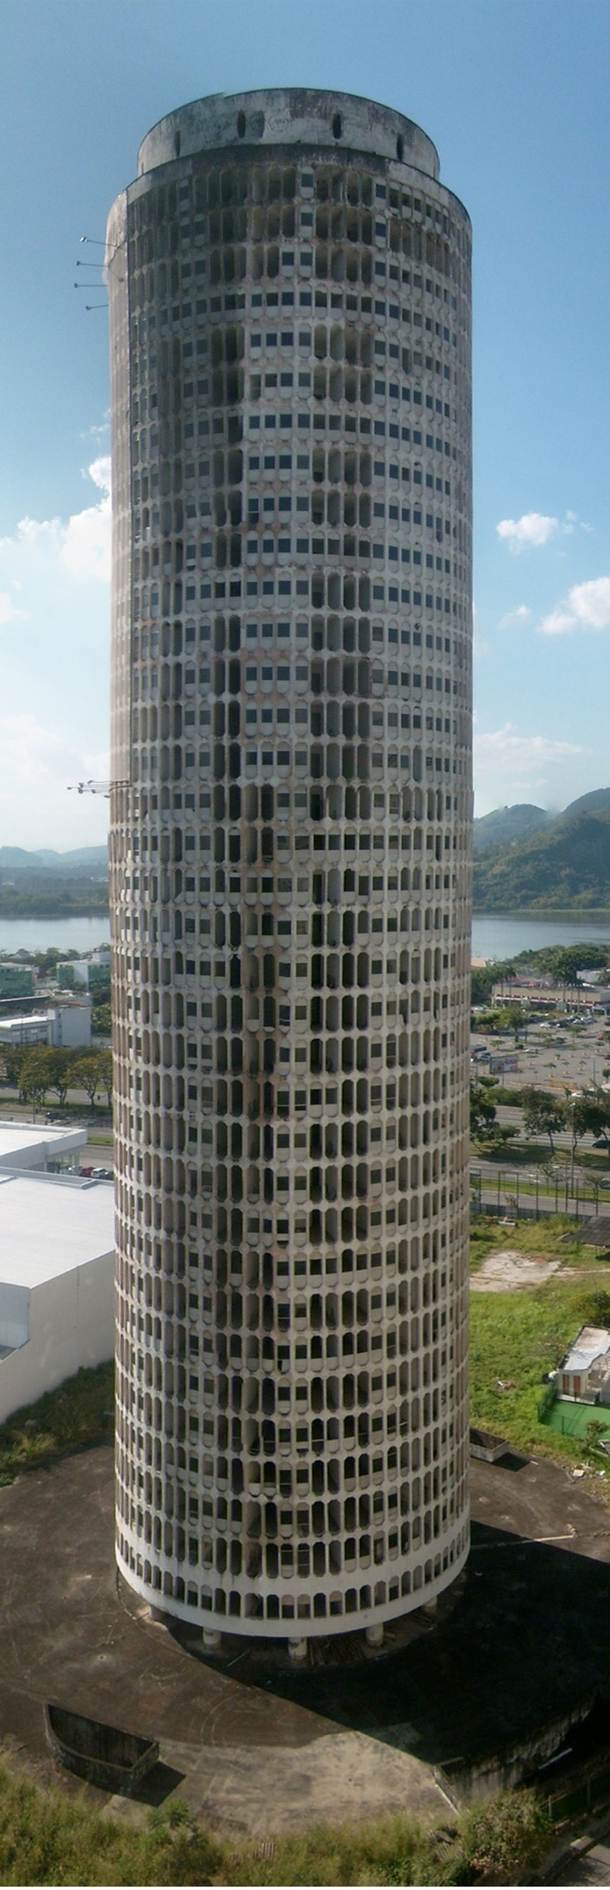 The forgotten Torre Abraham Lincoln in Rio de Janeiro Brazil Circular -story tower remains empty and unfinished since construction was halted in  Conceived as a modernist plan for the region the tower was intended to be the first in a series of  Photo by 